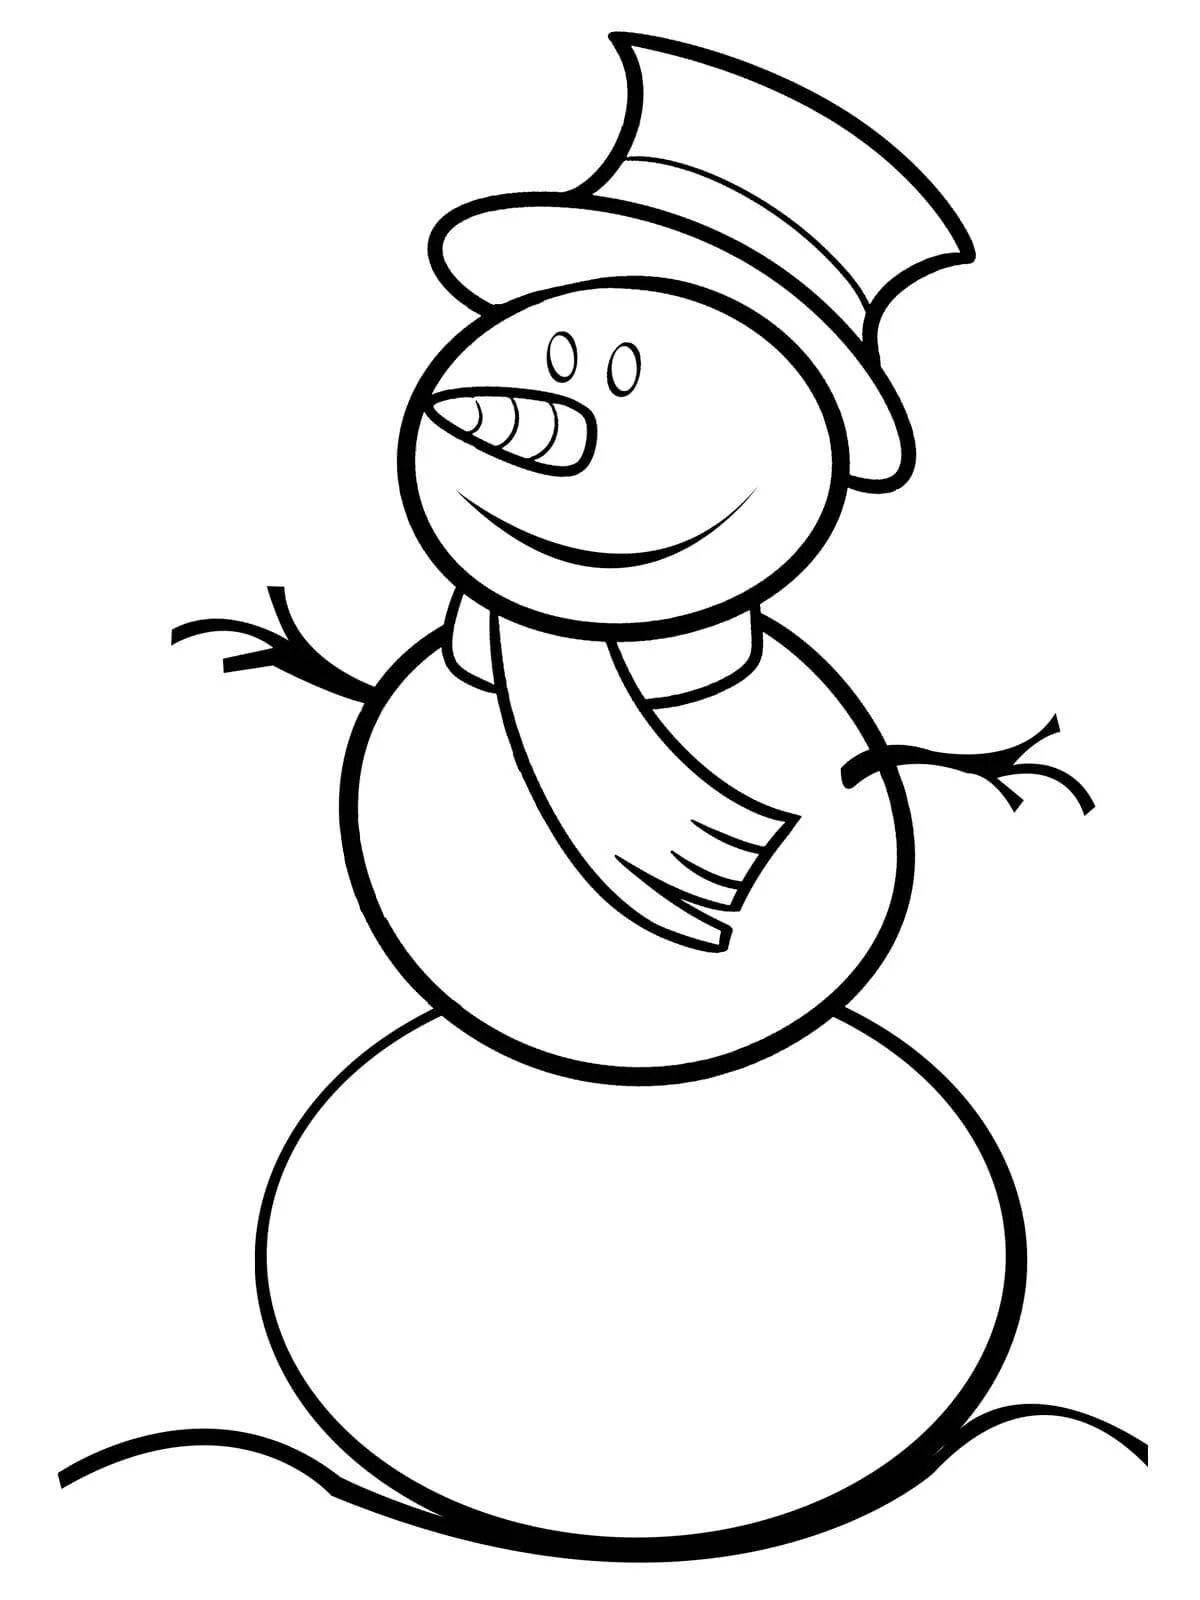 Shiny snowman coloring book for kids 5 6